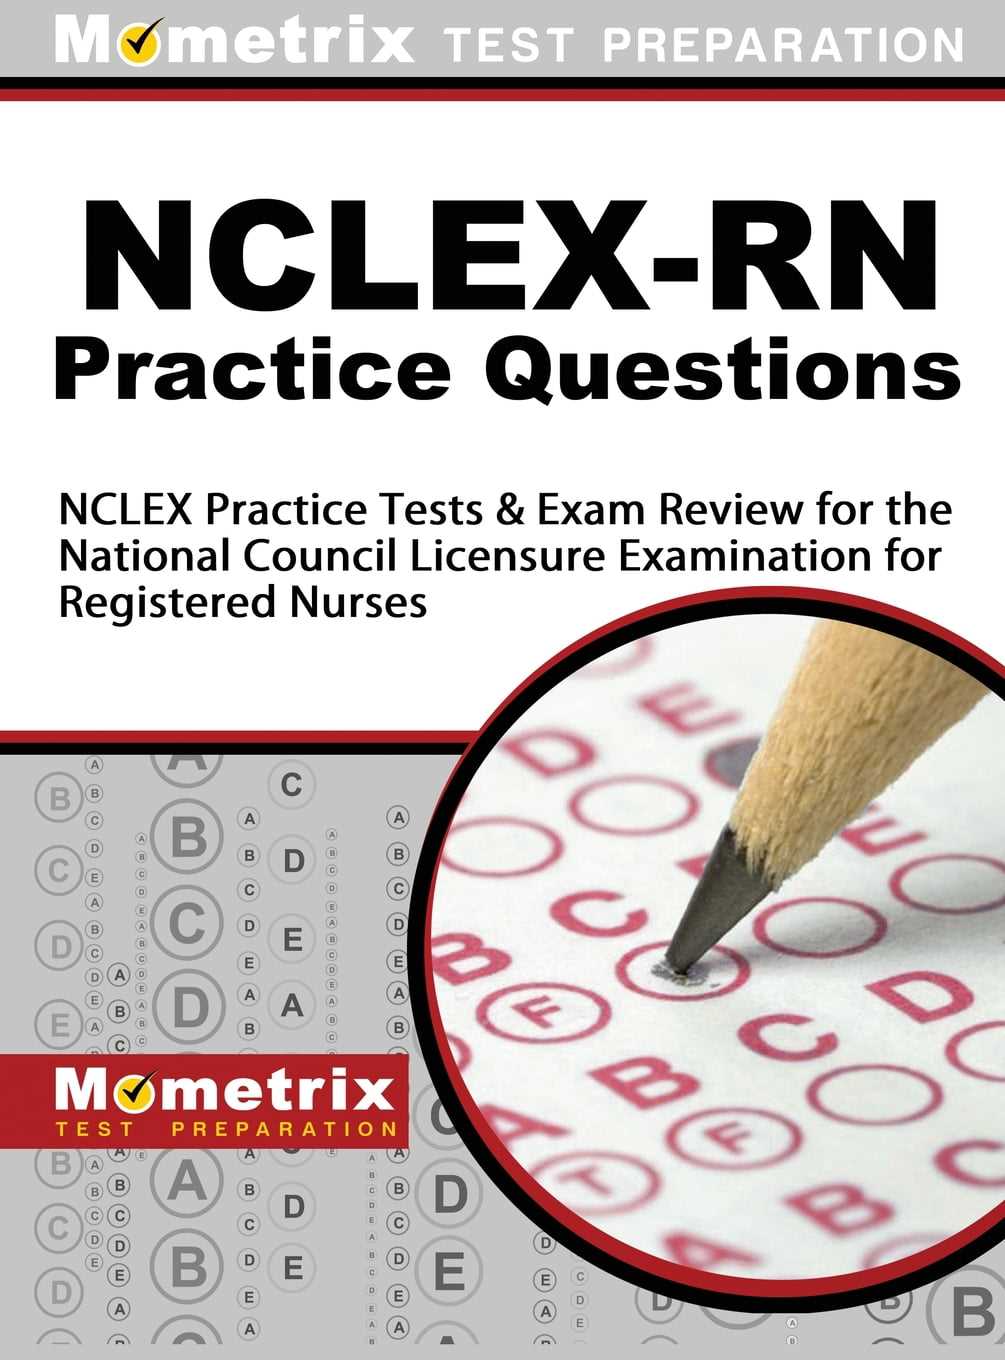 How to Use Saunders NCLEX RN Questions and Answers